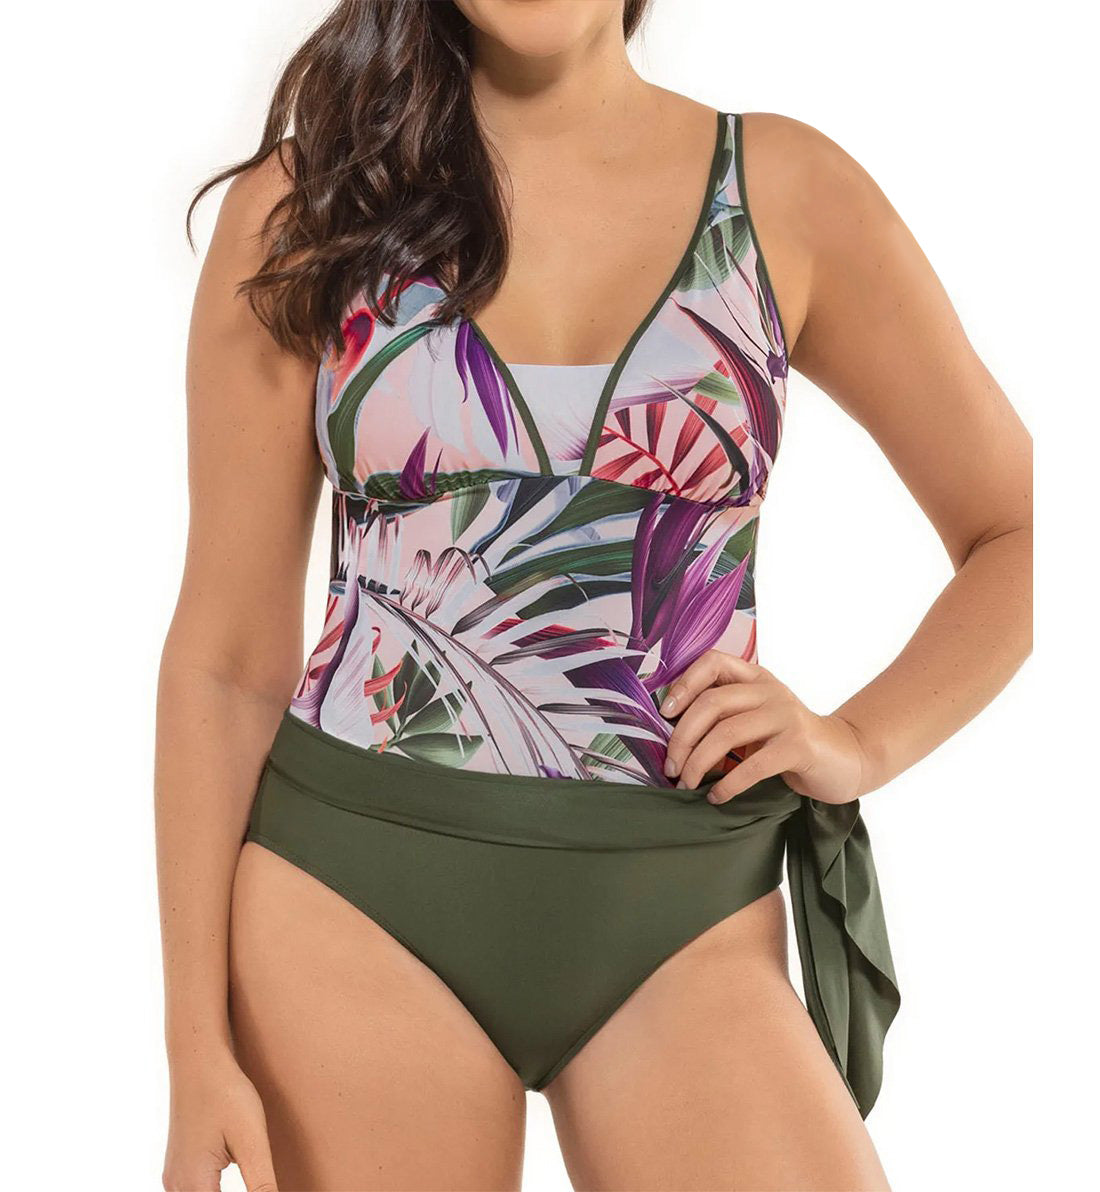 Leonisa Slimming Multiway Swim Dress (190875N),Small,Floral Green - Floral Green,Small